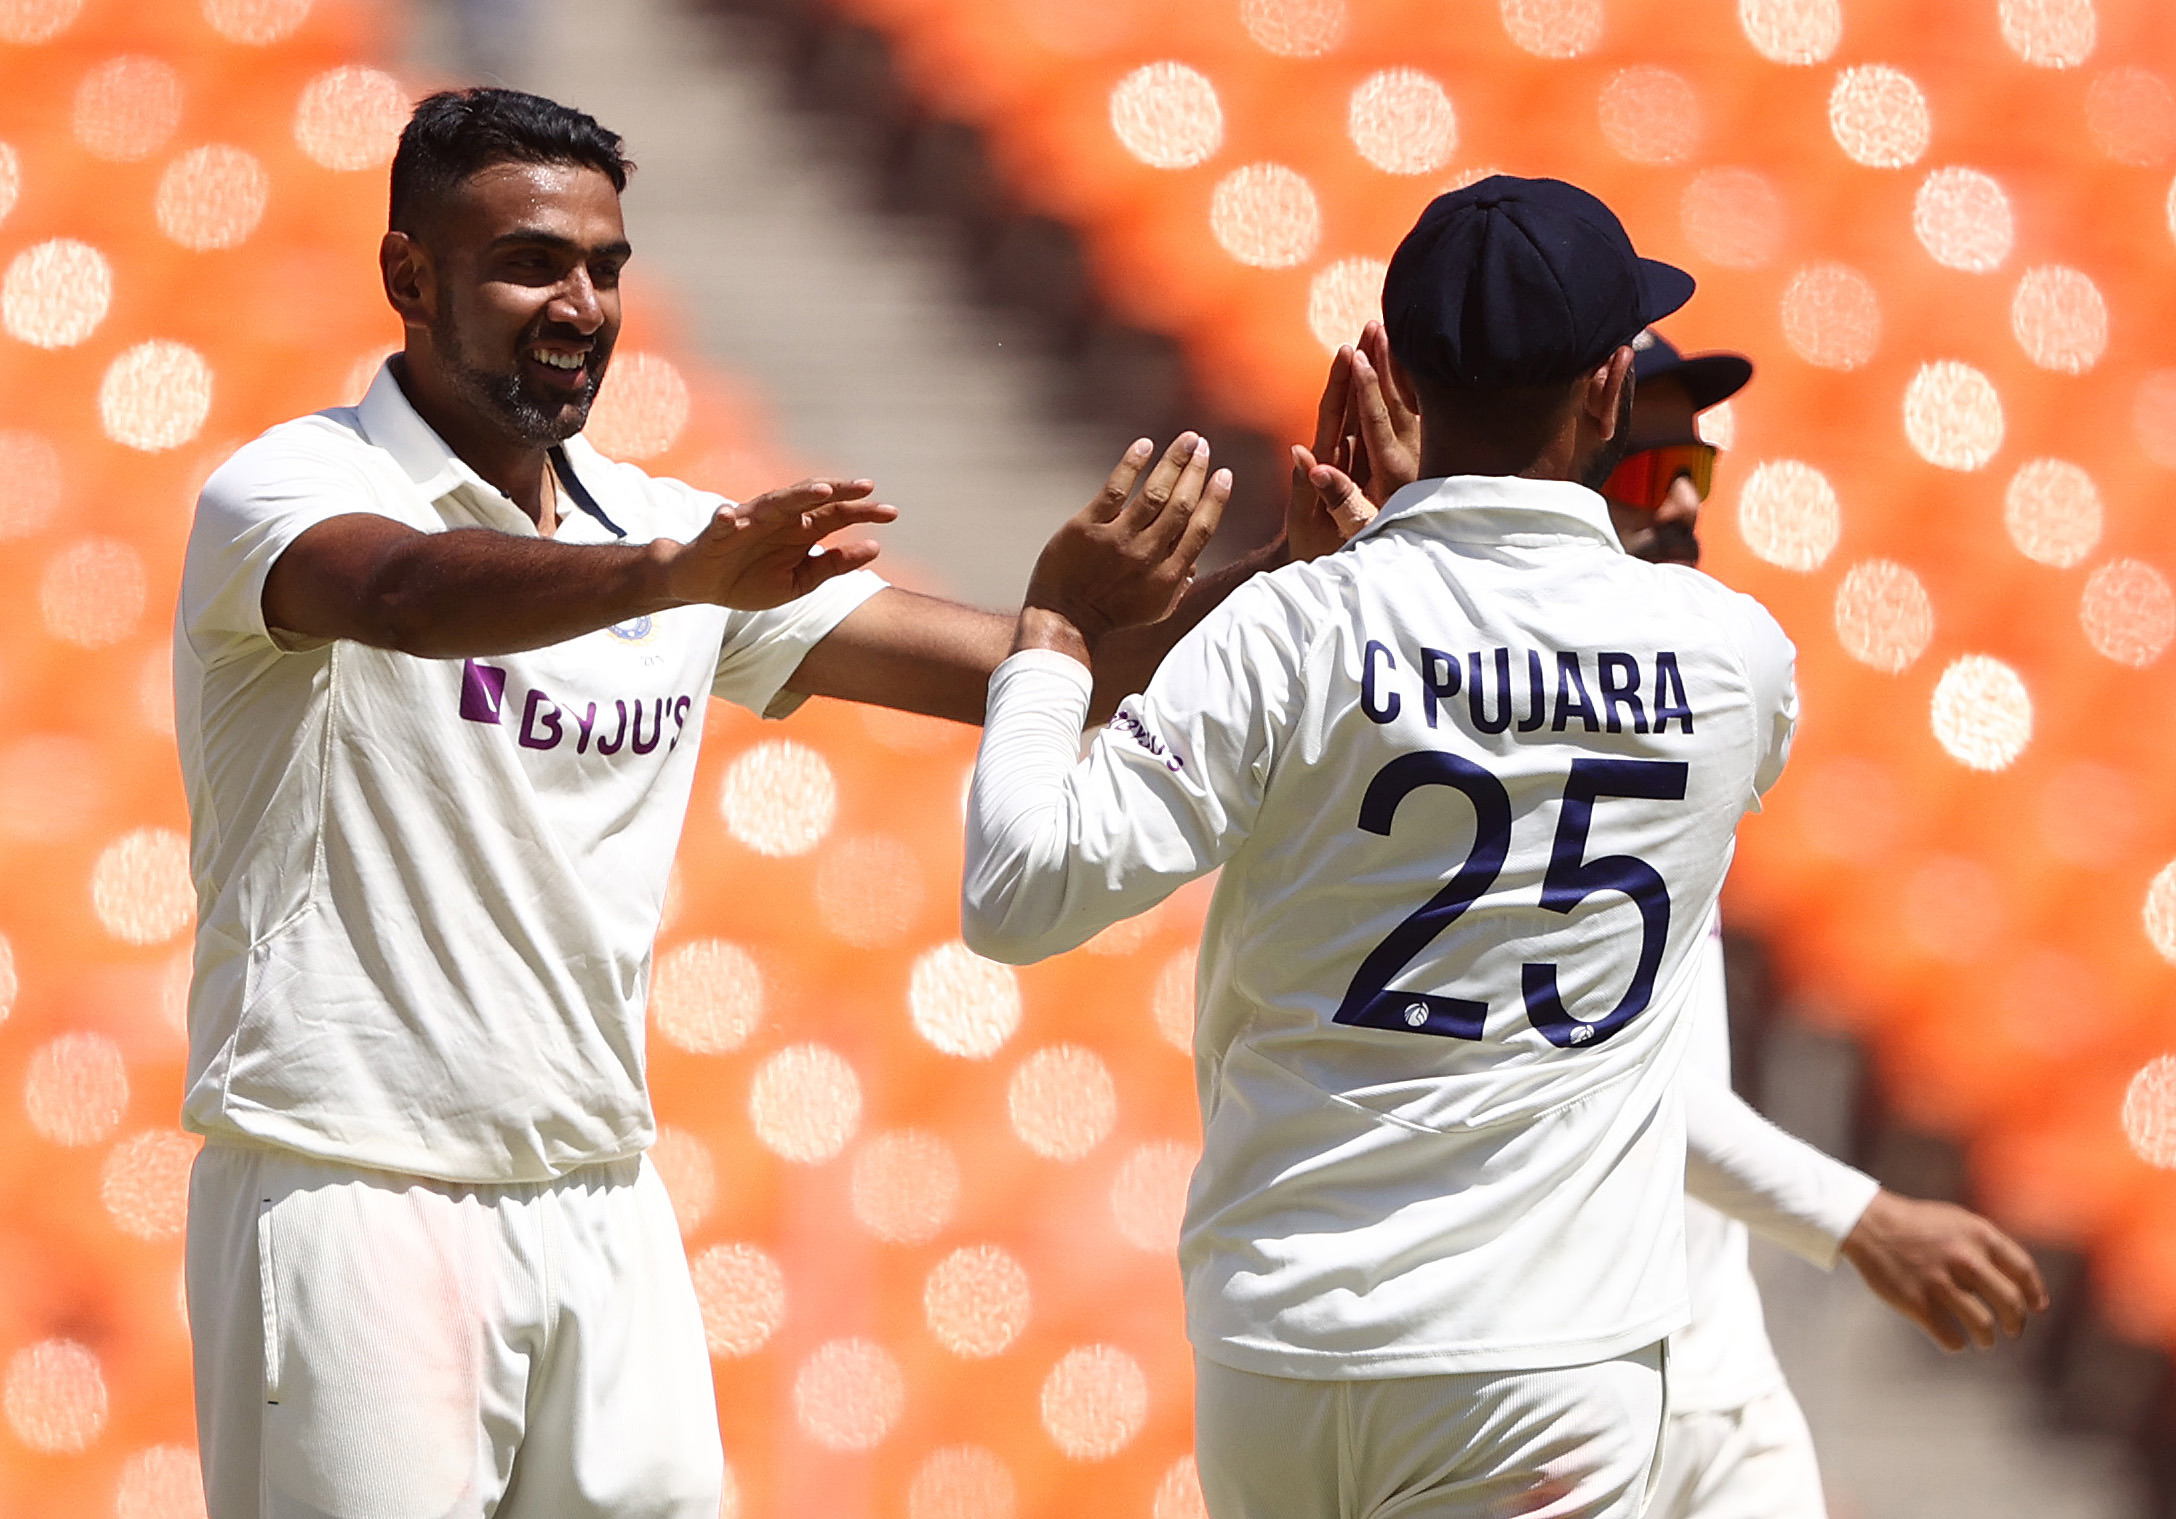 AHMEDABAD, INDIA - MARCH 10: Ravichandran Ashwin of India celebrates taking the wicket of Cameron Green of Australia during day two of the Fourth Test match in the series between India and Australia at Narendra Modi Stadium on March 10, 2023 in Ahmedabad, India. (Photo by Robert Cianflone/Getty Images)